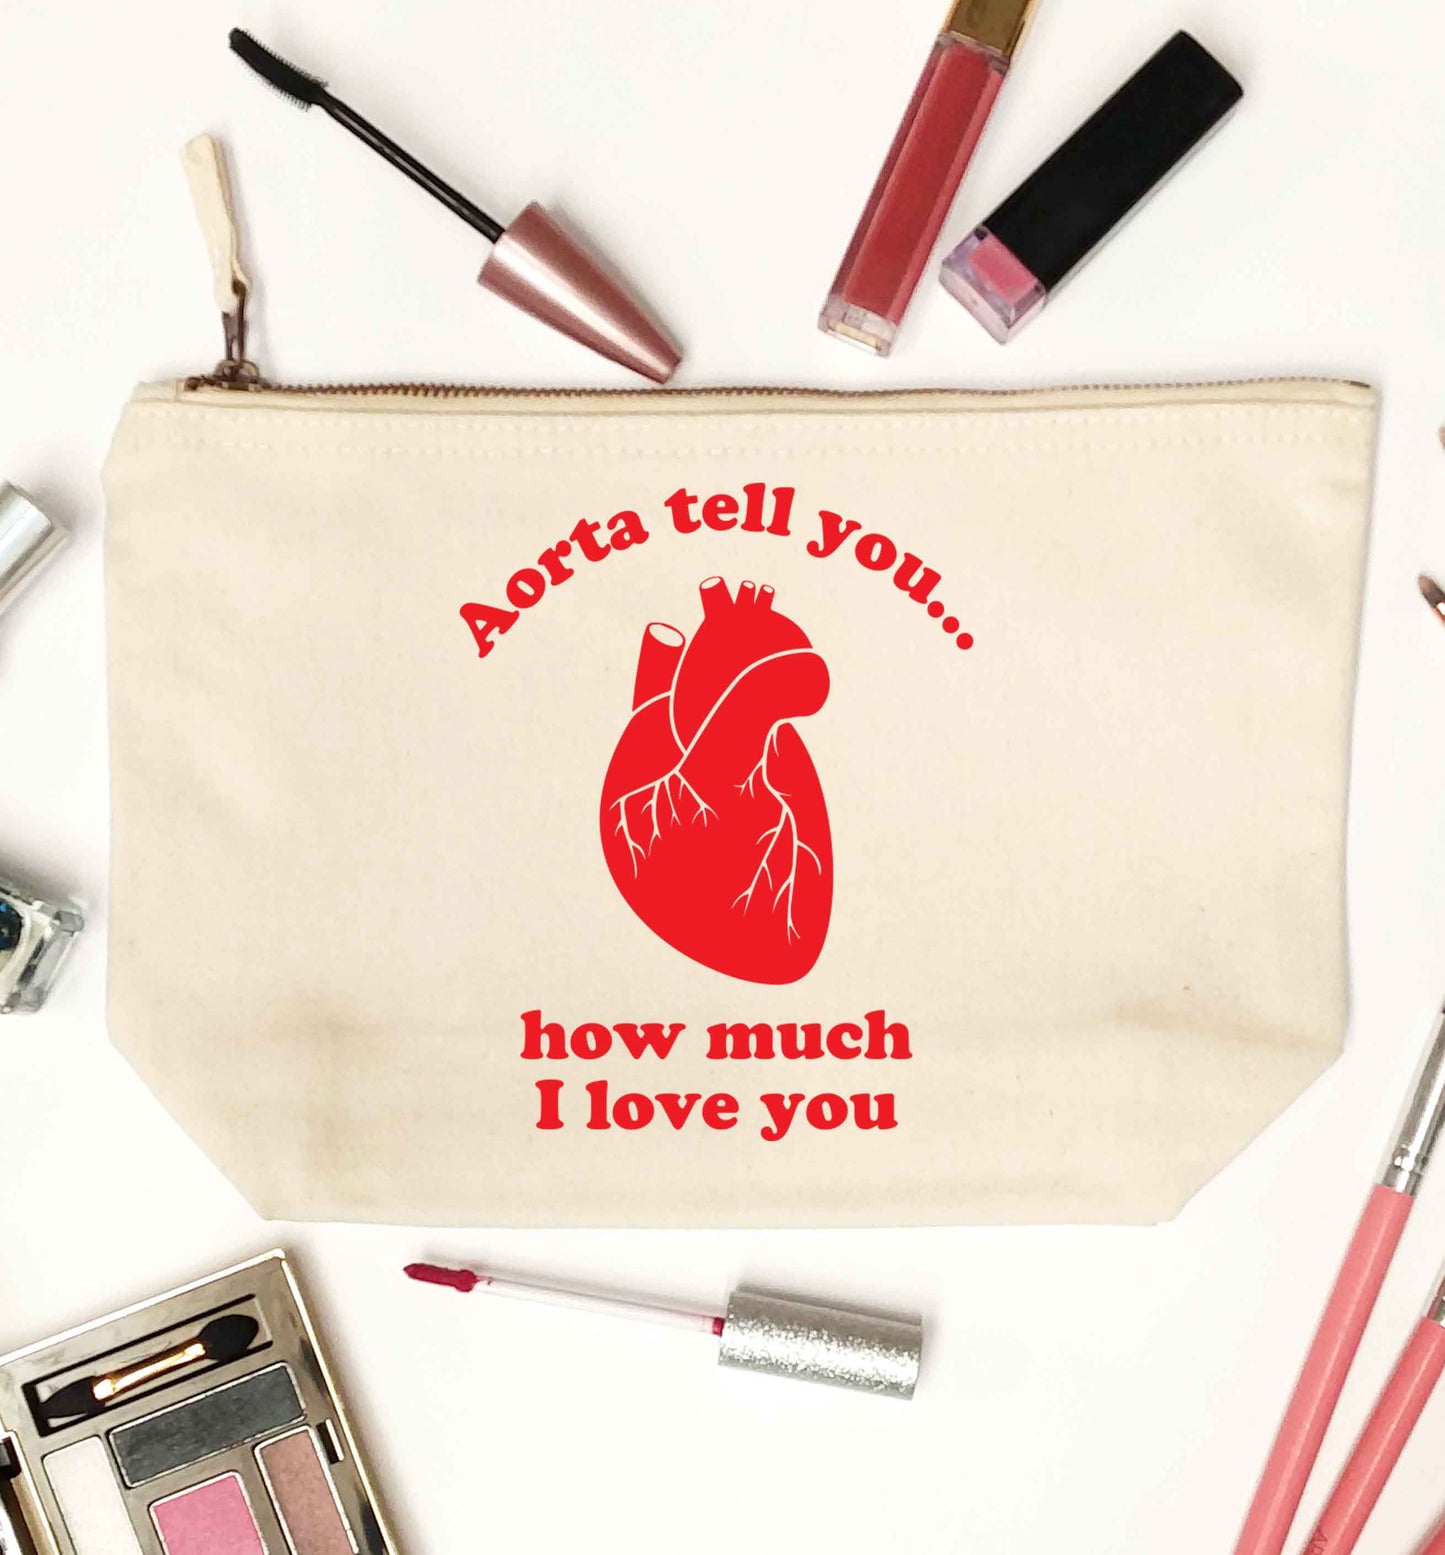 Aorta tell you how much I love you natural makeup bag